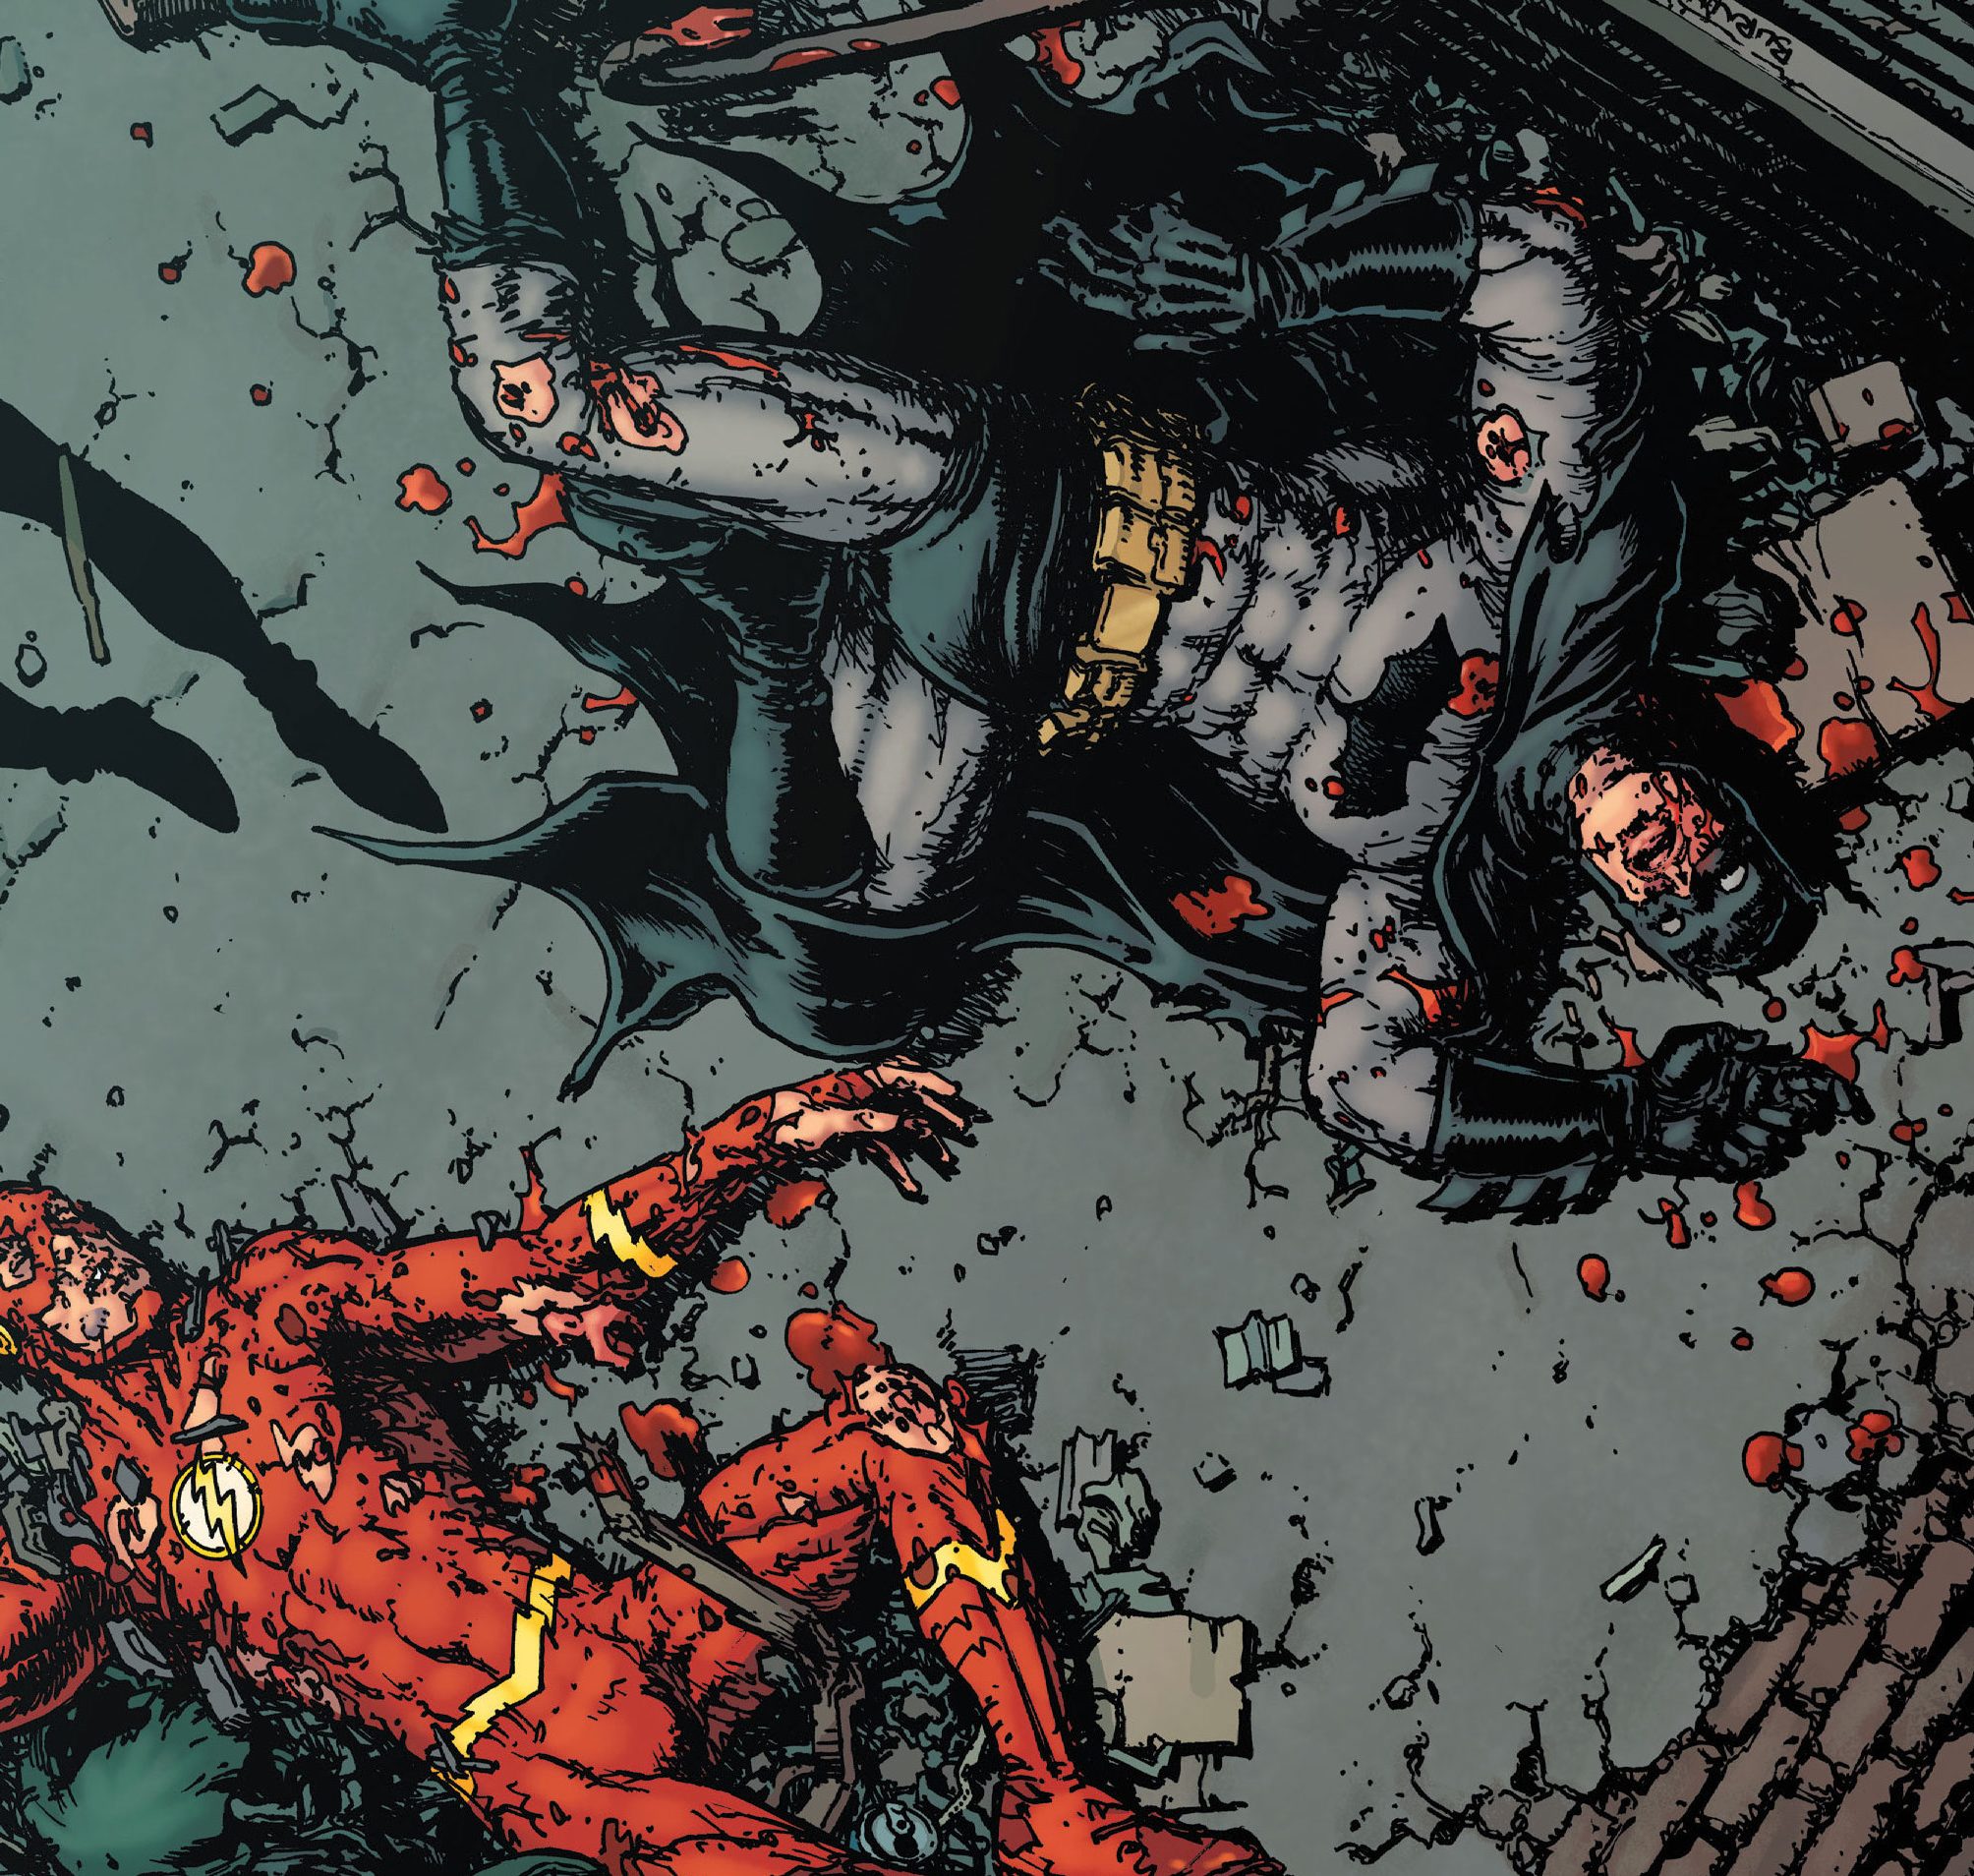 Batman and Flash may kill each other in 'Heroes in Crisis' tie-in event this February